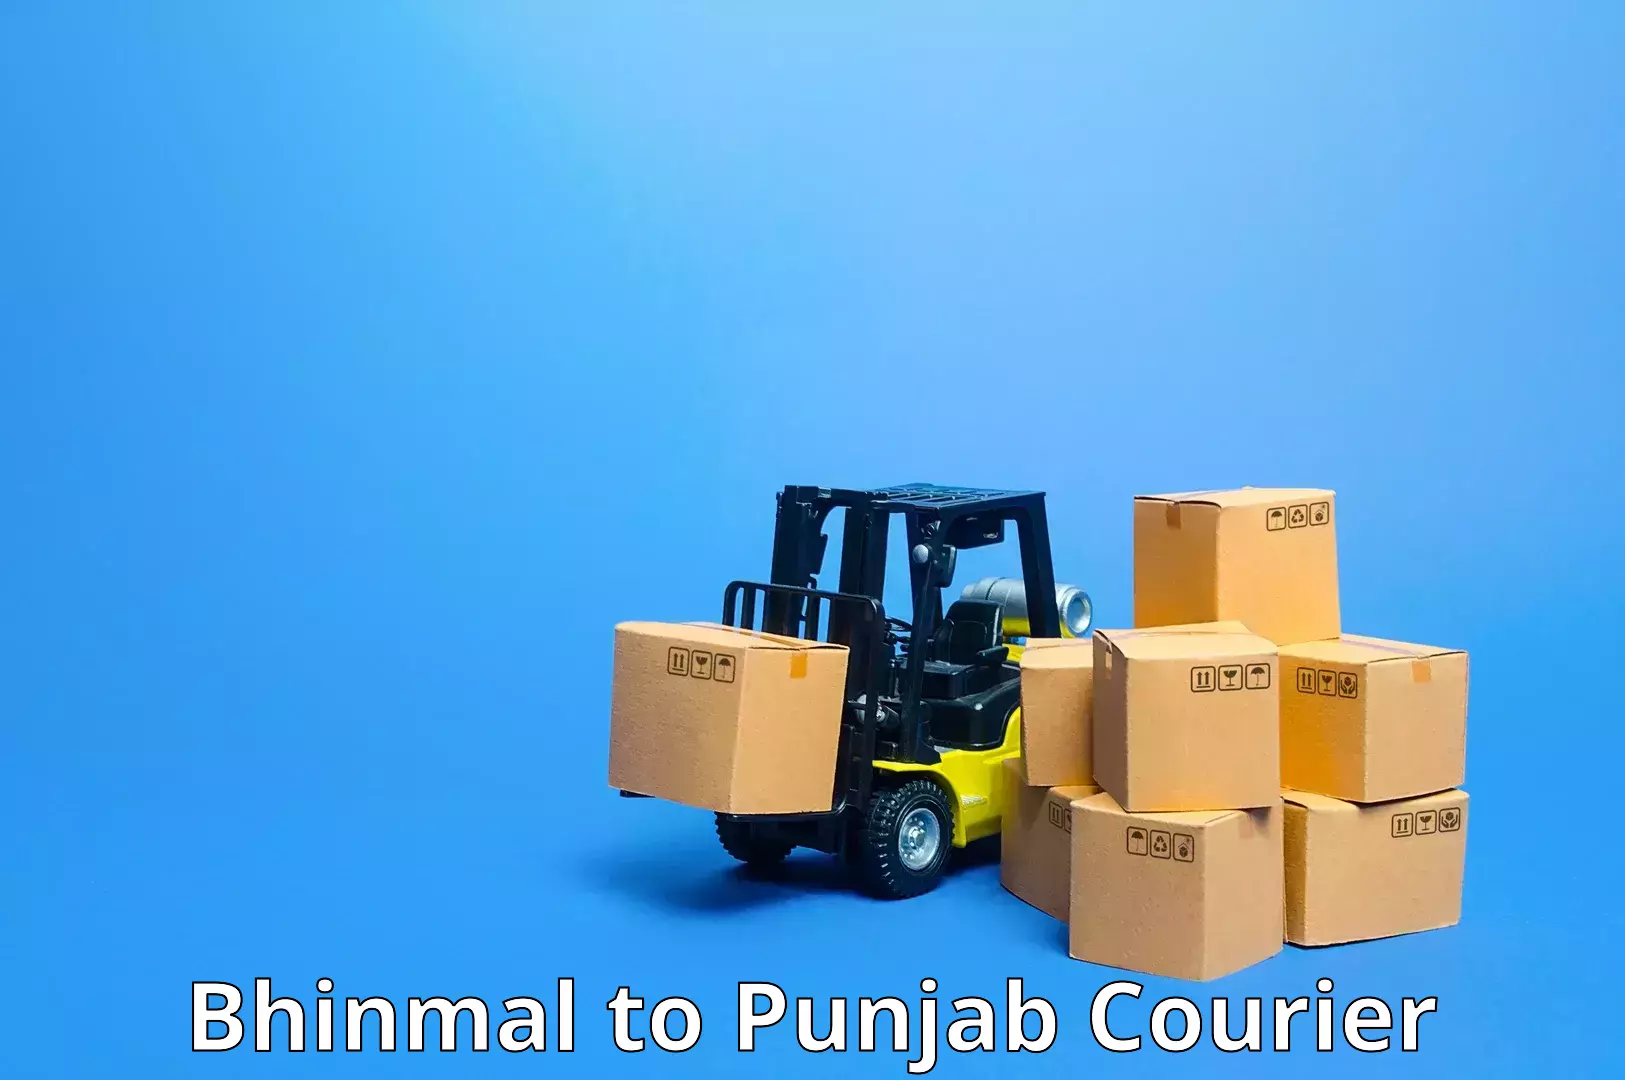 State-of-the-art courier technology Bhinmal to Punjab